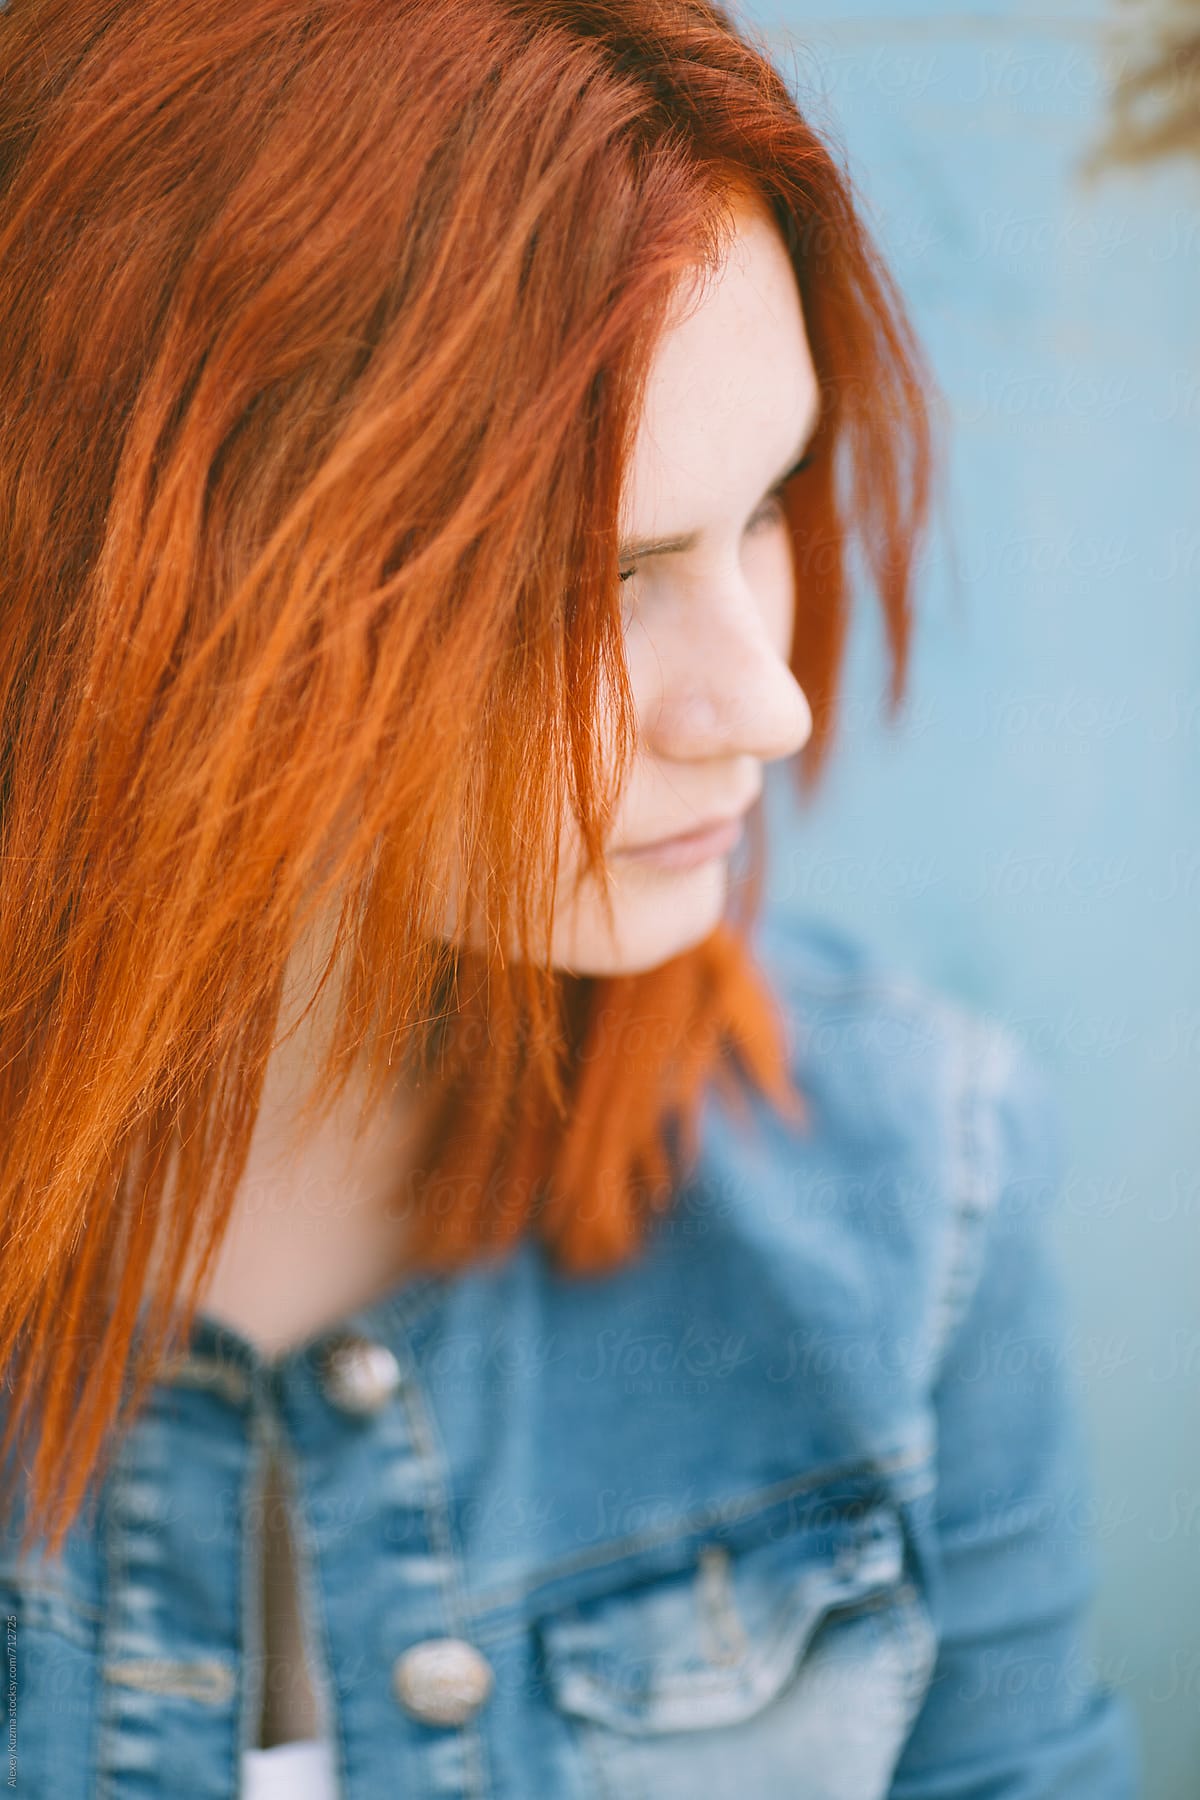 Woman With Red Hair By Alexey Kuzma